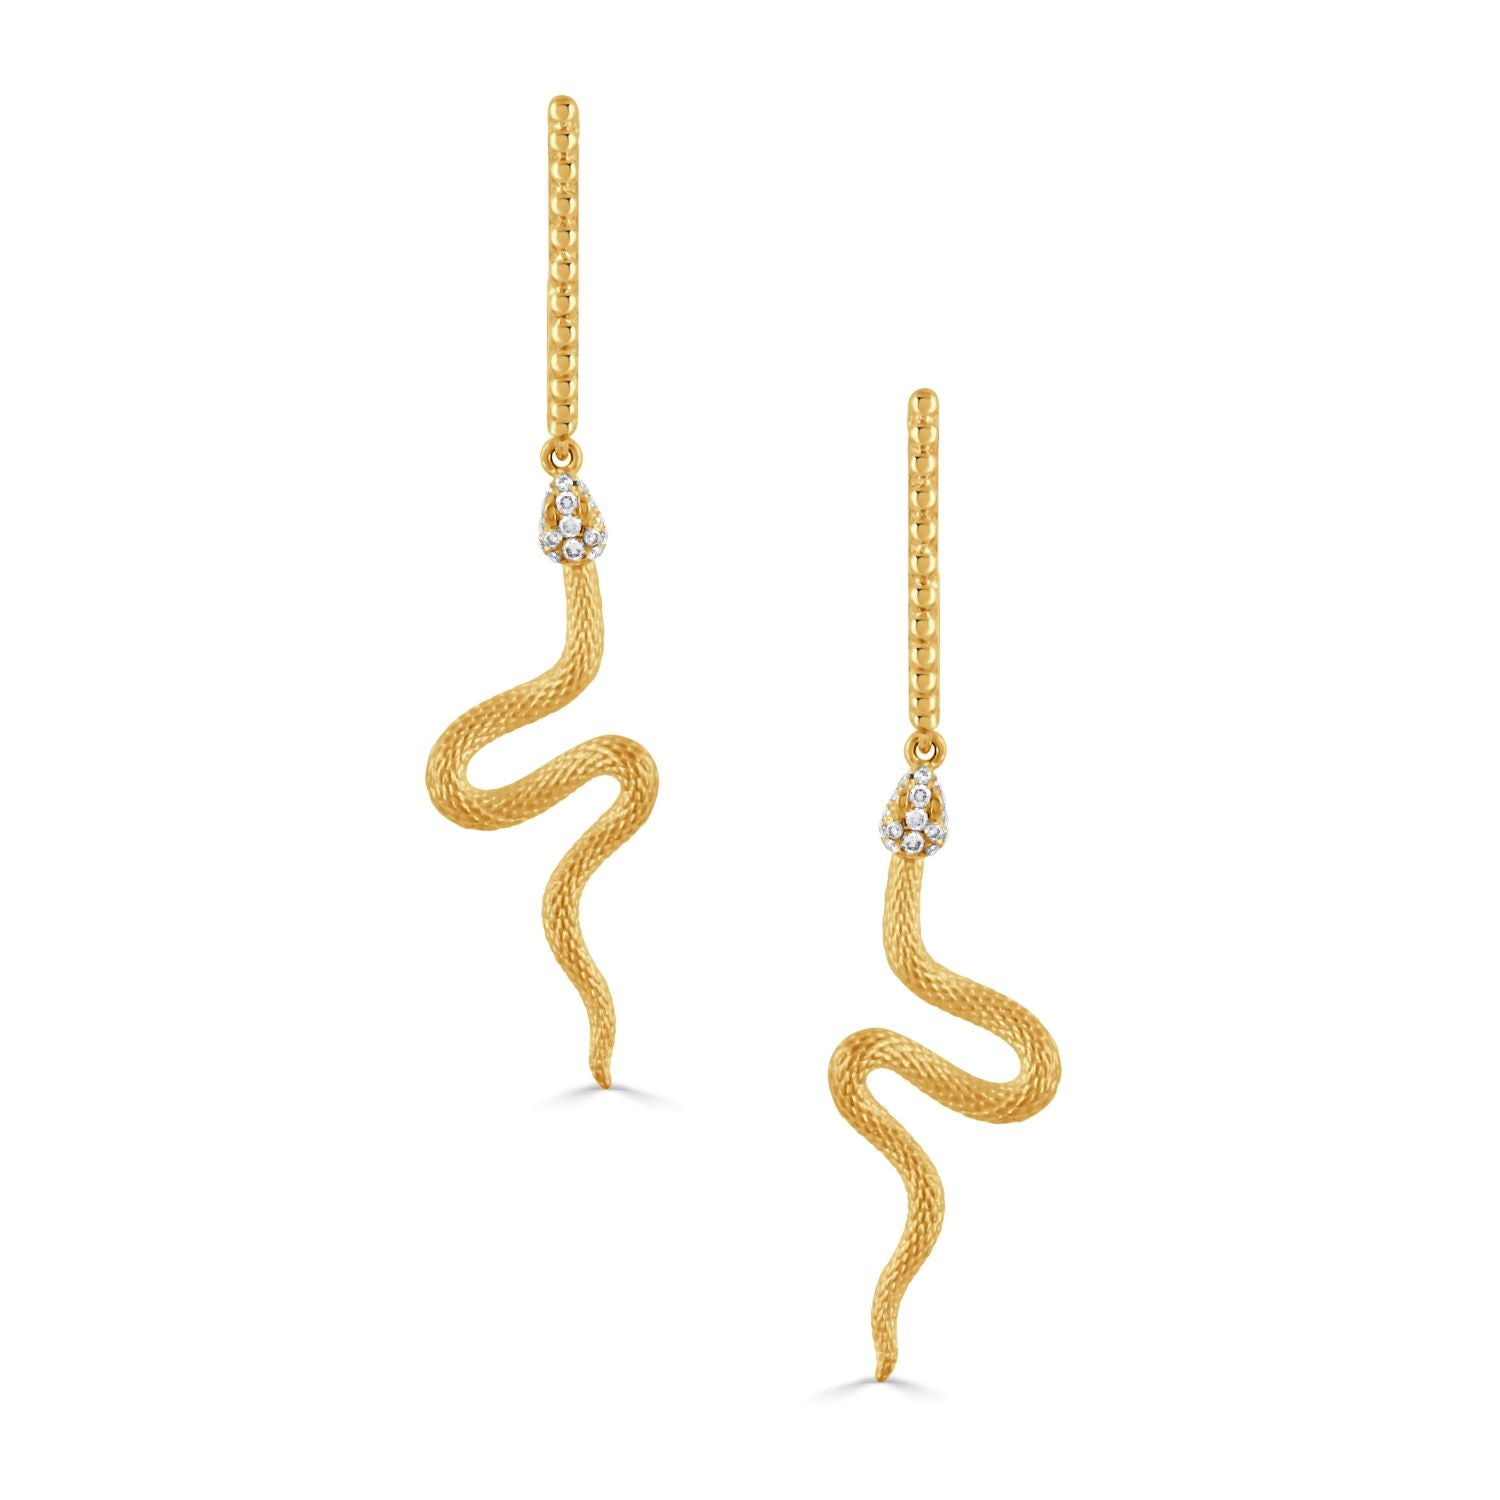 18K YELLOW GOLD SERPENT EARRINGS IN SATIN FINISH WITH BEADED GOLD UTOP